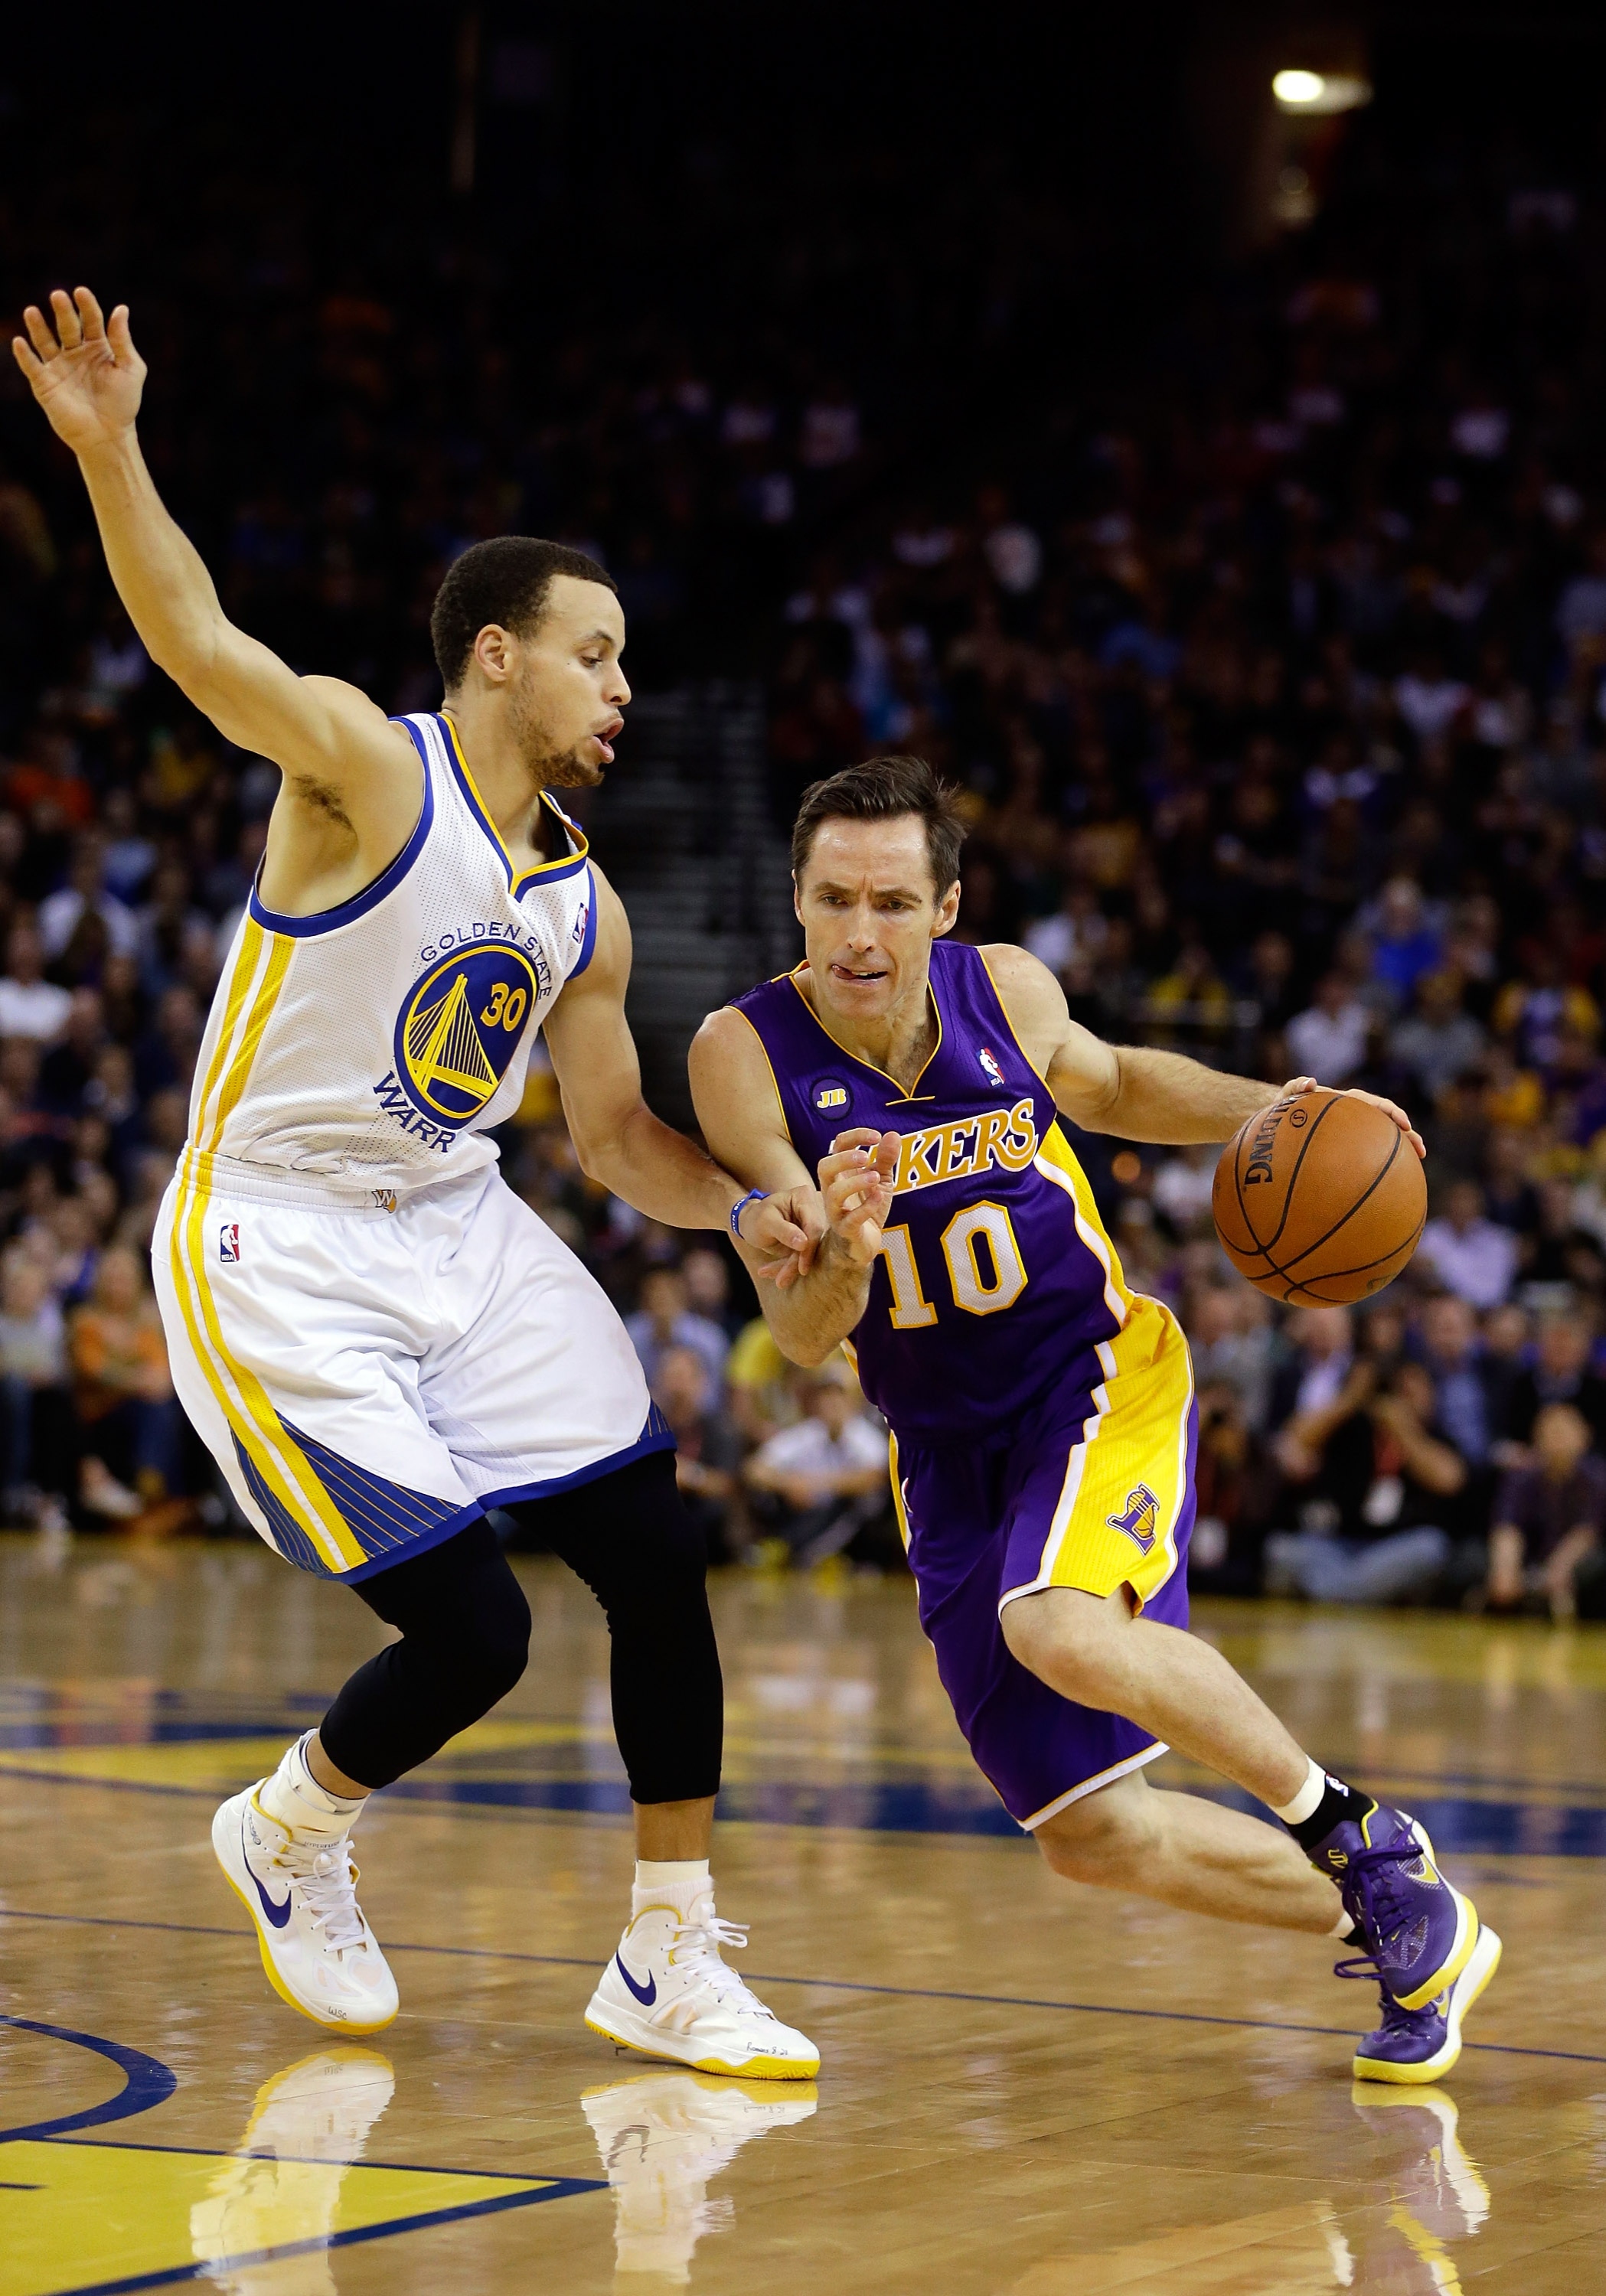 OAKLAND, CA - MARCH 25: Steve Nash #10 of the Los Angeles Lakers drives on Stephen Curry #30 of the Golden State Warriors at Oracle Arena on March 25, 2013 in Oakland, California.  NOTE TO USER: User expressly acknowledges and agrees that, by downloading and or using this photograph, User is consenting to the terms and conditions of the Getty Images License Agreement.  (Photo by Ezra Shaw/Getty Images)